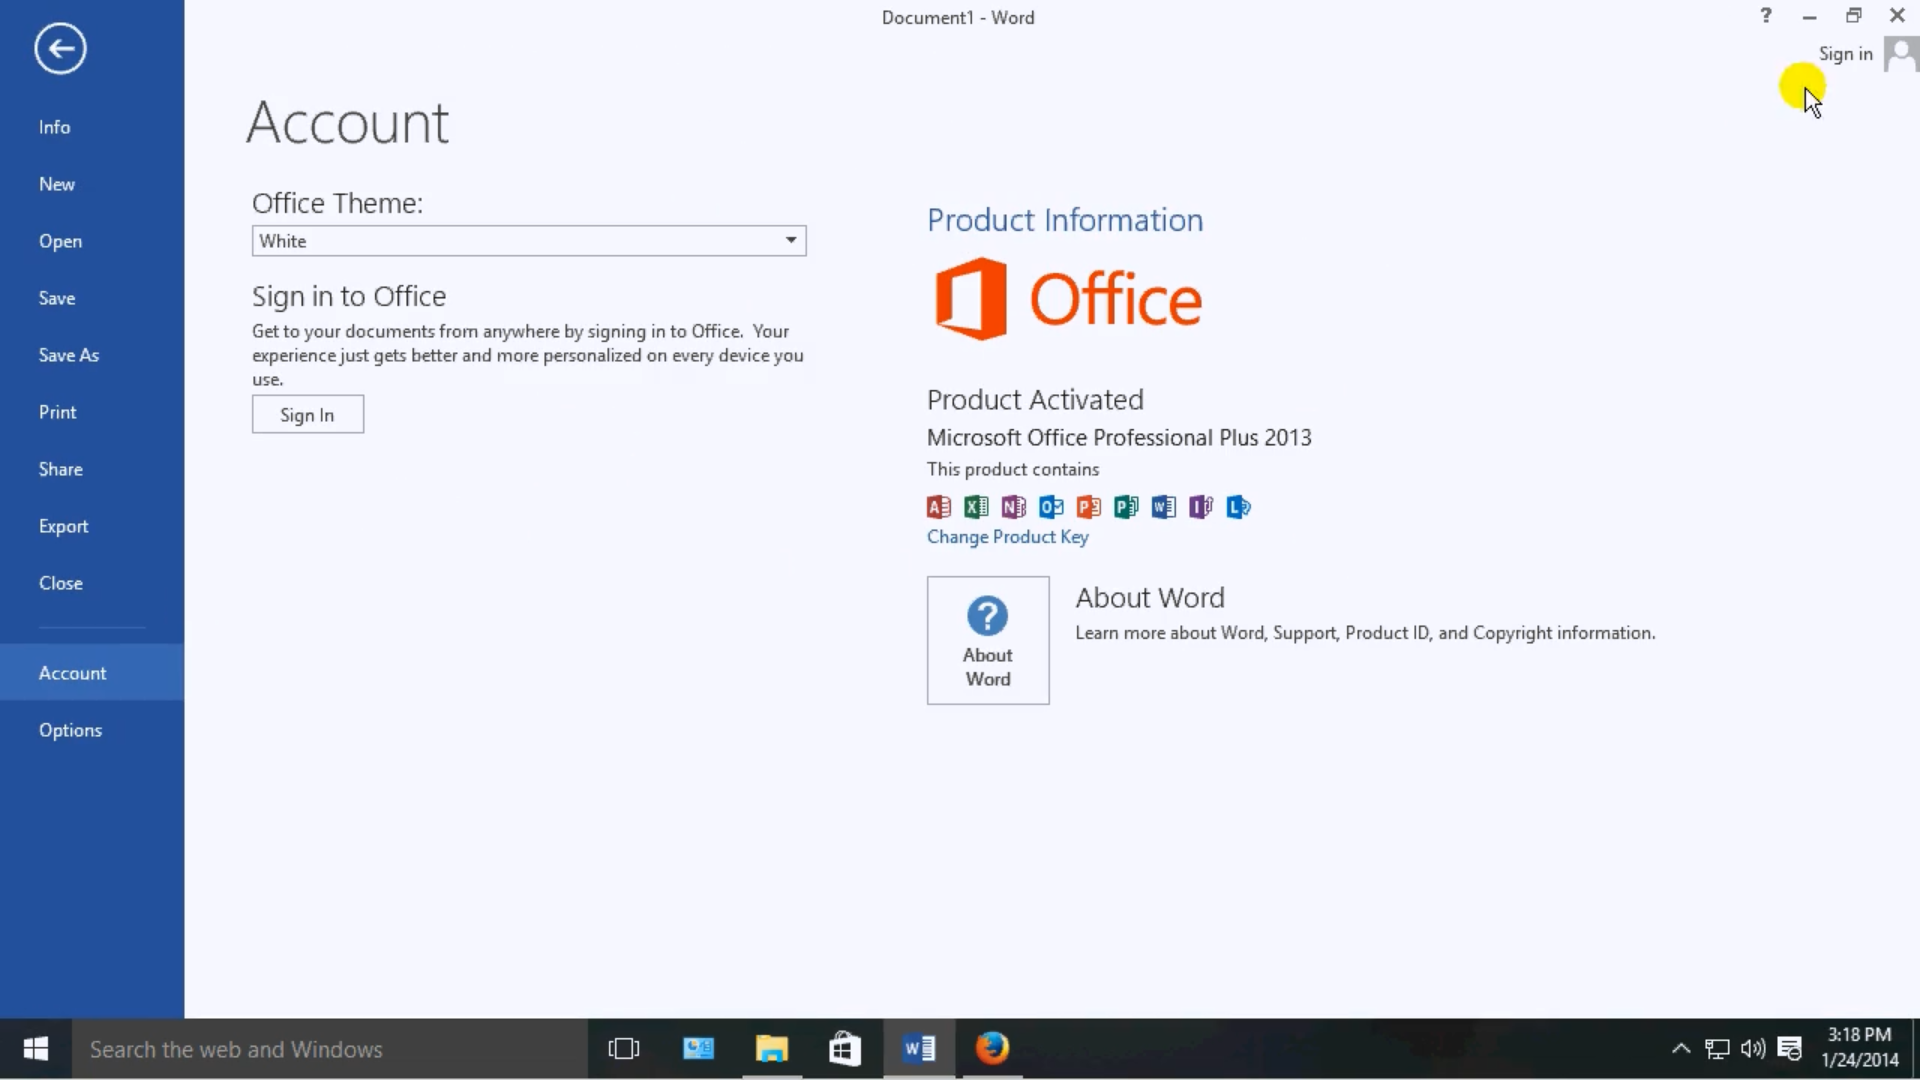 microsoft office 2016 activate office toolkit